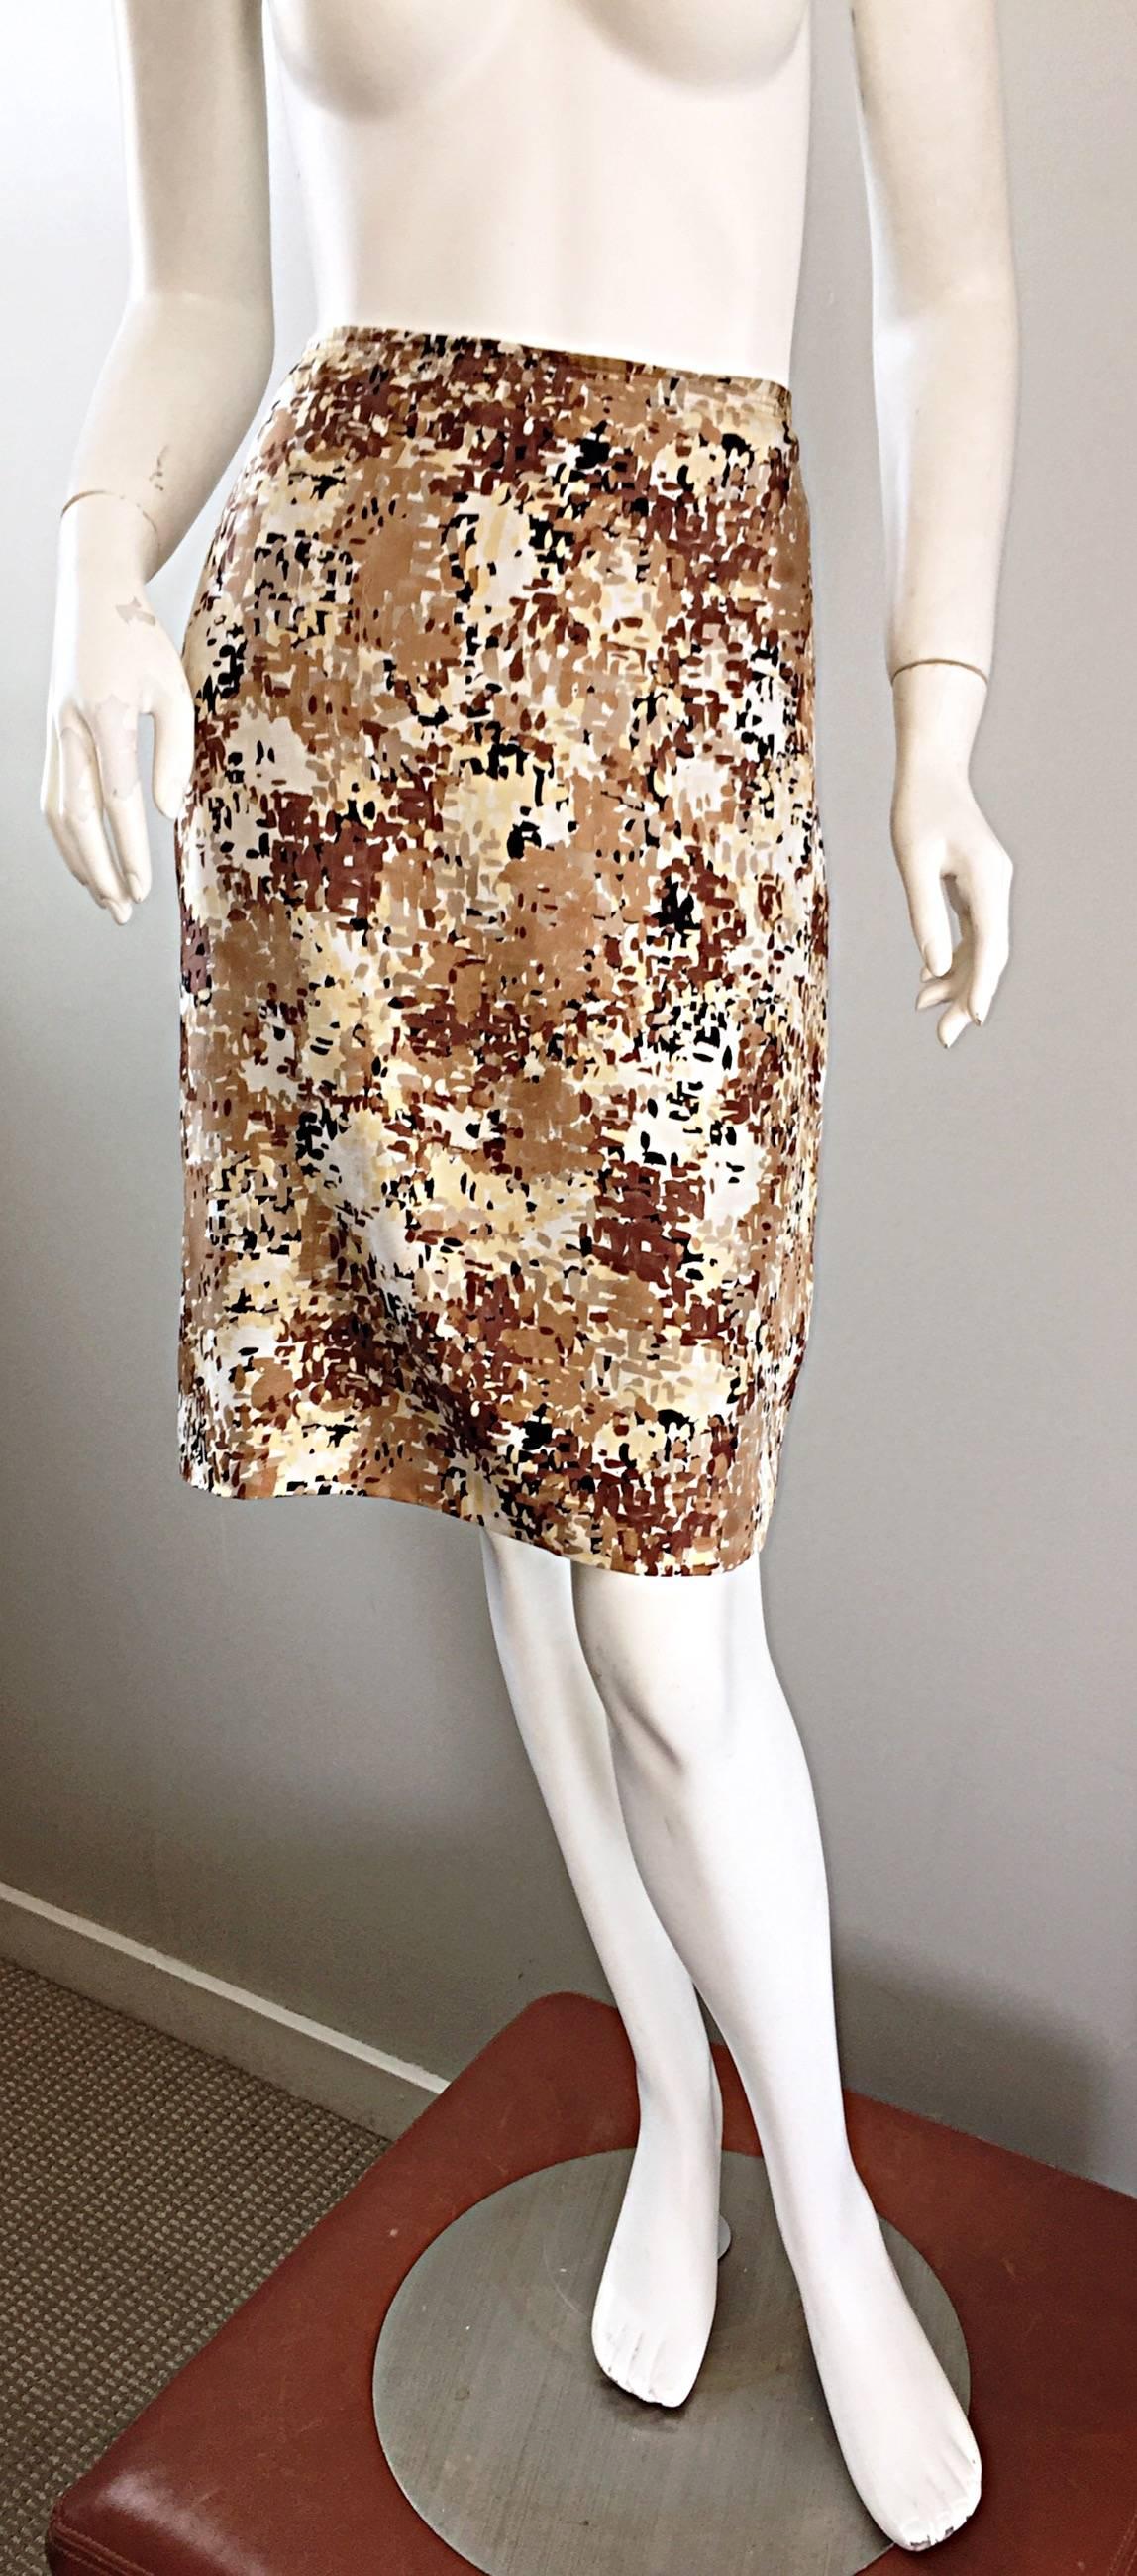 Flattering PRADA Runway Fall Winter 2001 (one of the most celebrated collections from Prada in the fashion house's history!) silk high waisted pencil skirt! Features a 'splatter paint' print in brown, tan, black and ivory print throughout. Hidden